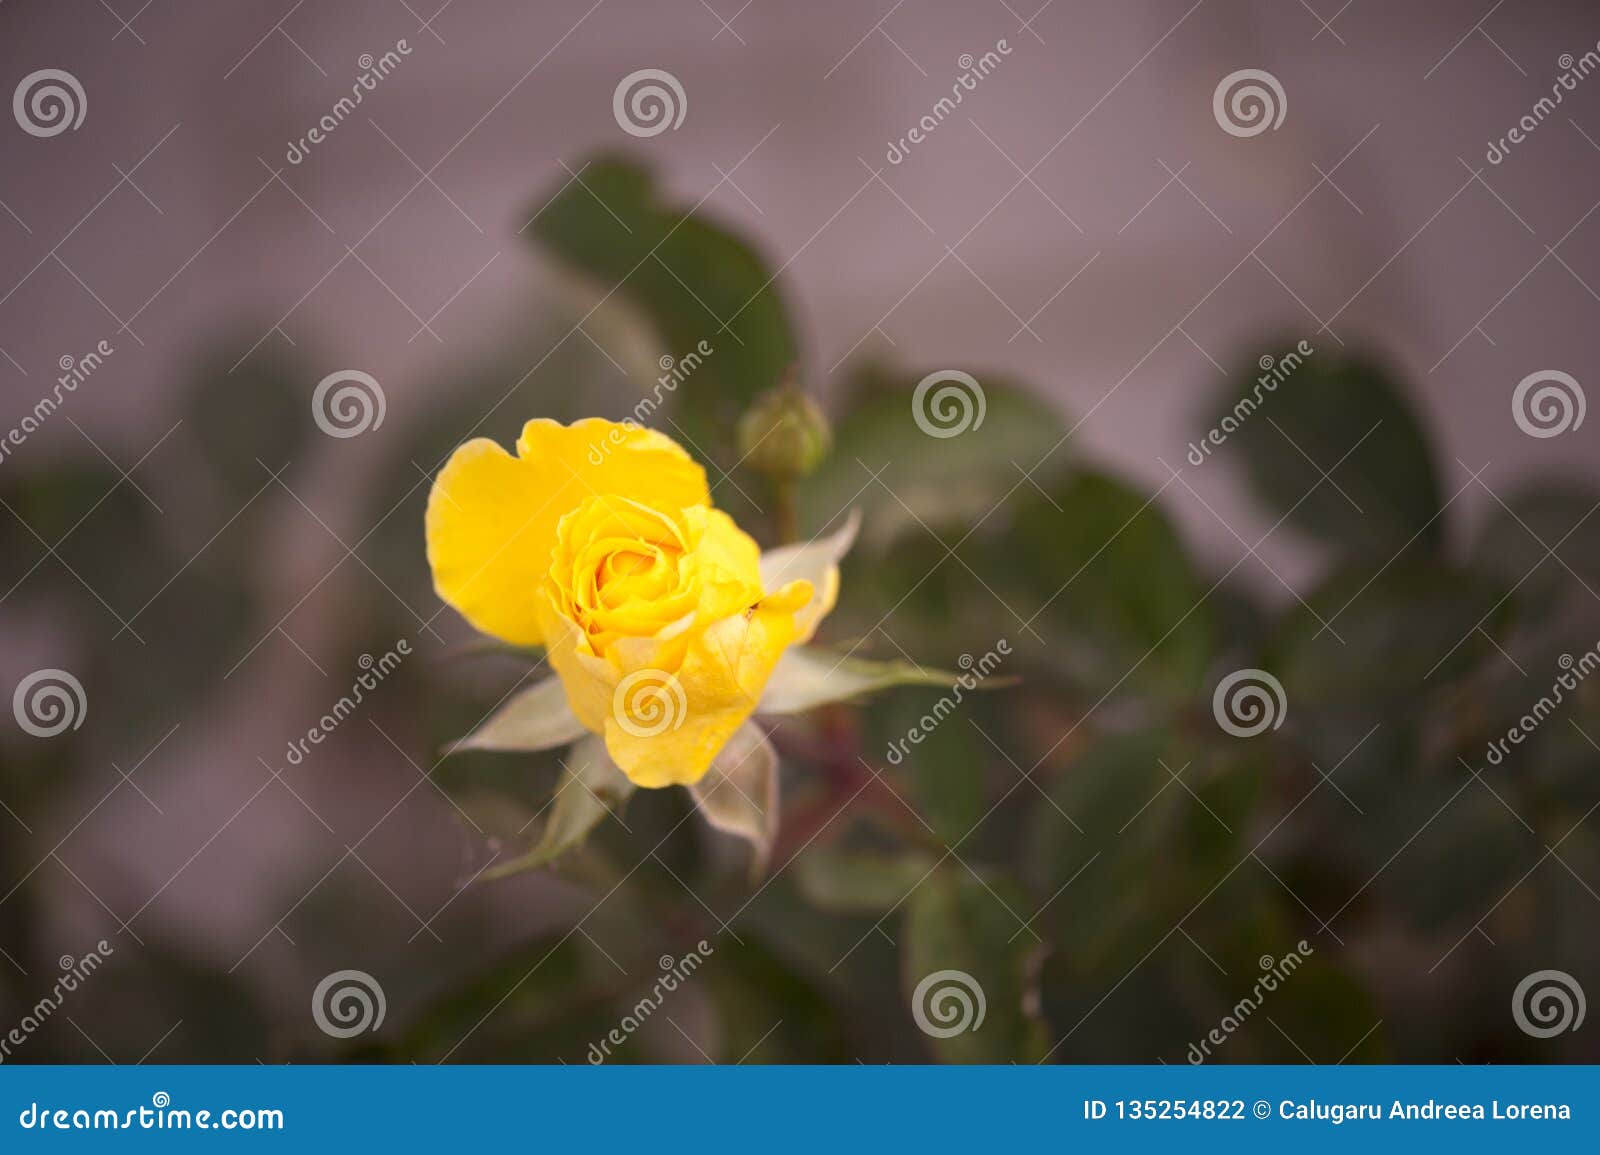 Yellow Rose On A Blurred Background Stock Photo - Image of blurred ...